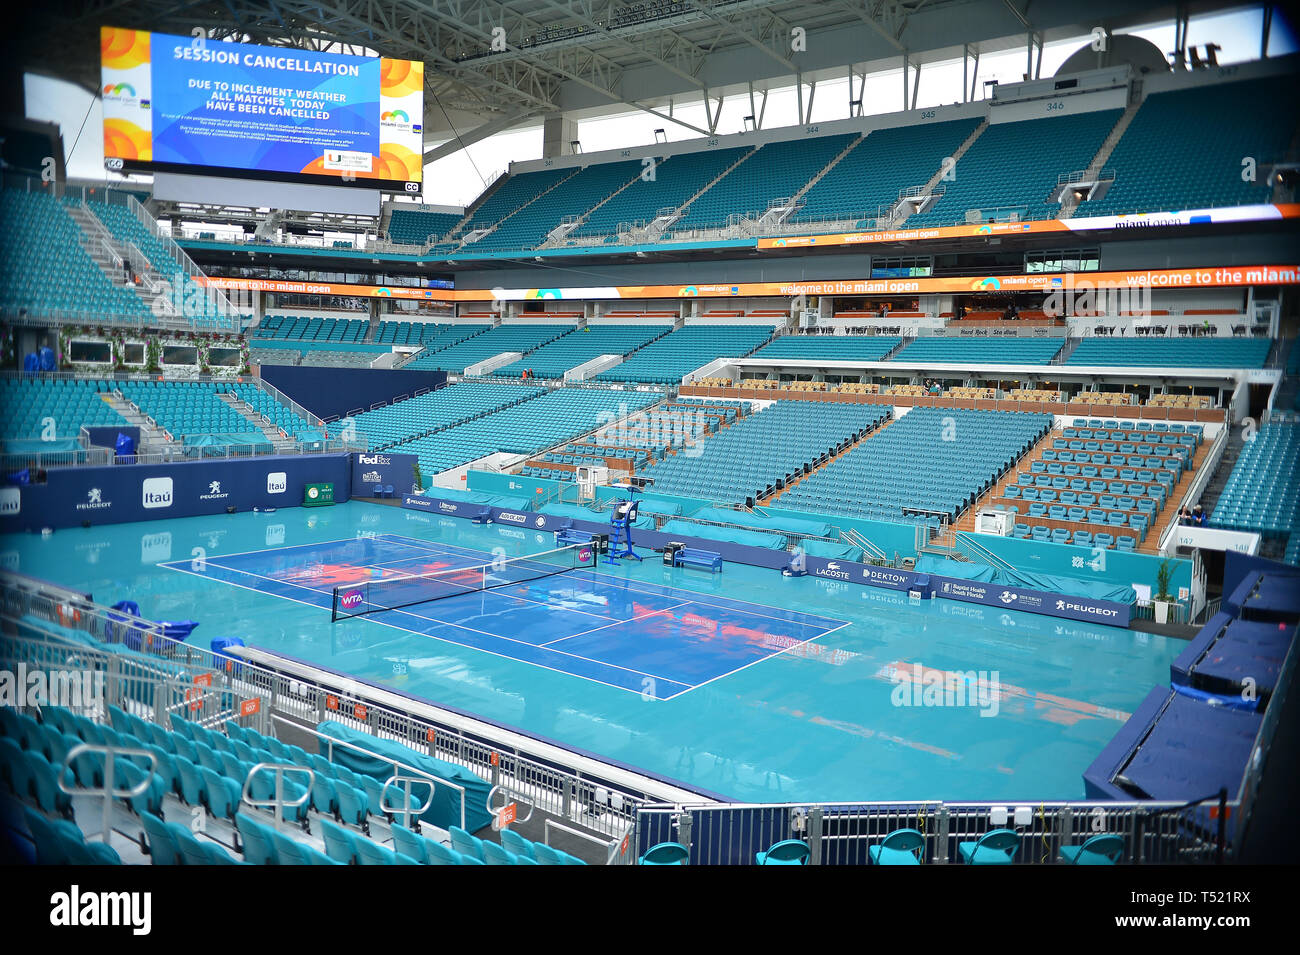 Miami Open 2019 Court And Its Scoreboard Announcing Tennis